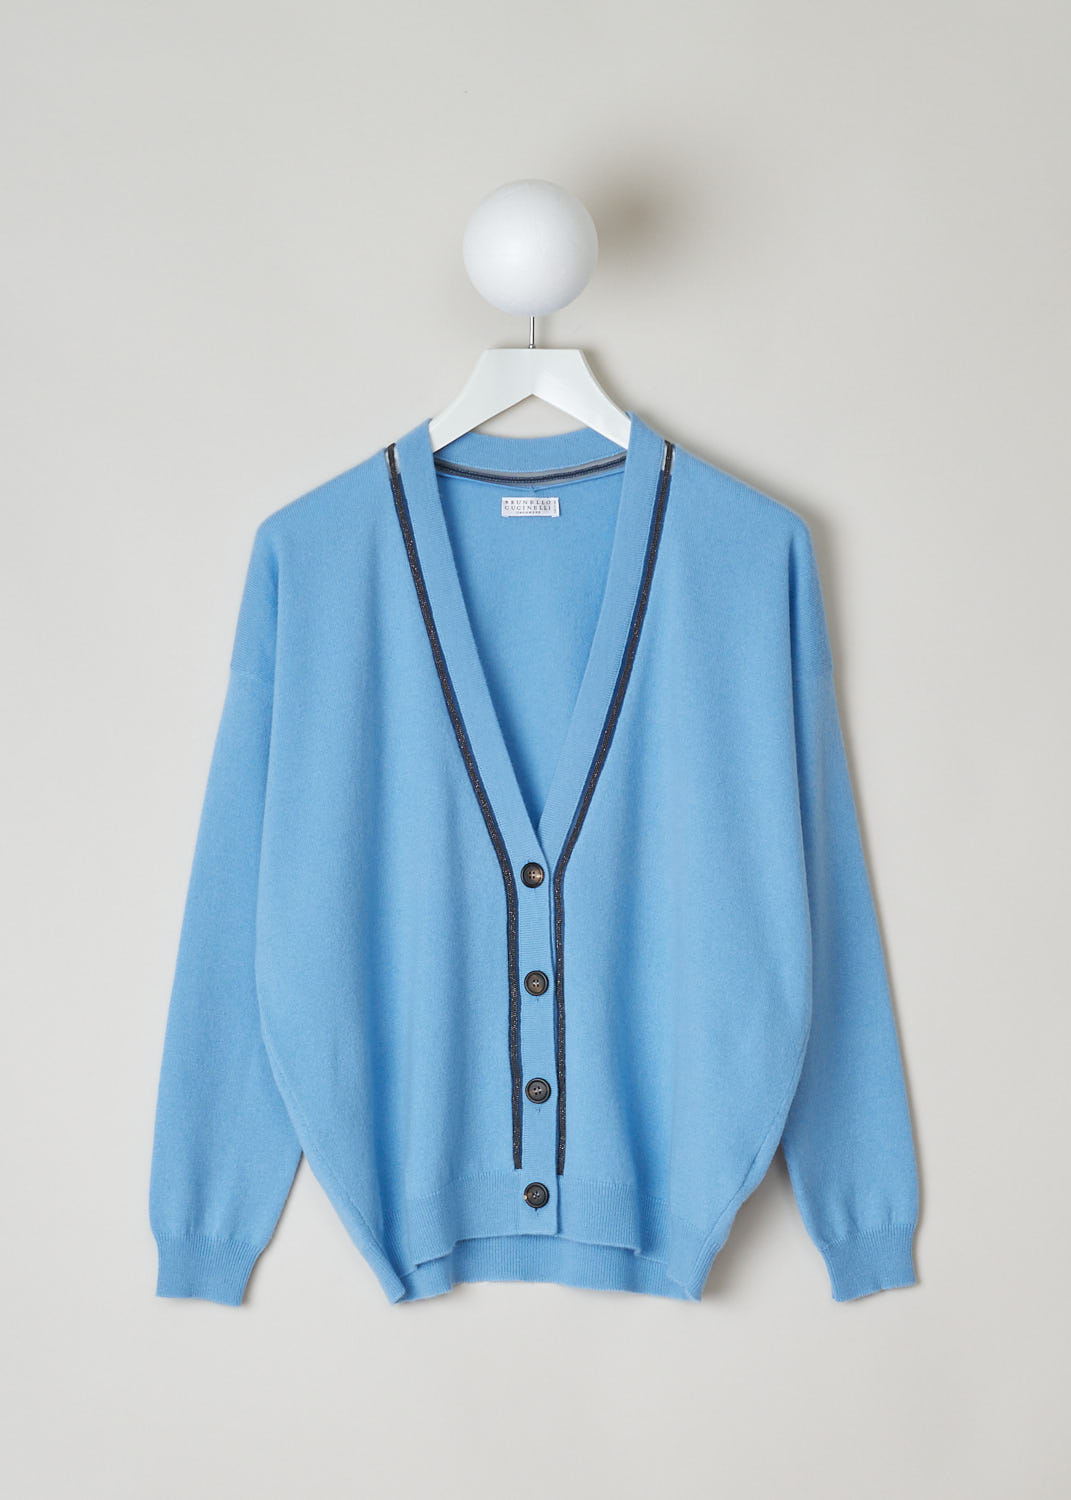 BRUNELLO CUCINELLI, BLUE CARDIGAN WITH BEADED TRIMS, M12167306_C9401, Blue, Front, Light blue cardigan with a bead embellished trim. The cardigan had a front button closure with tortoise shell buttons.